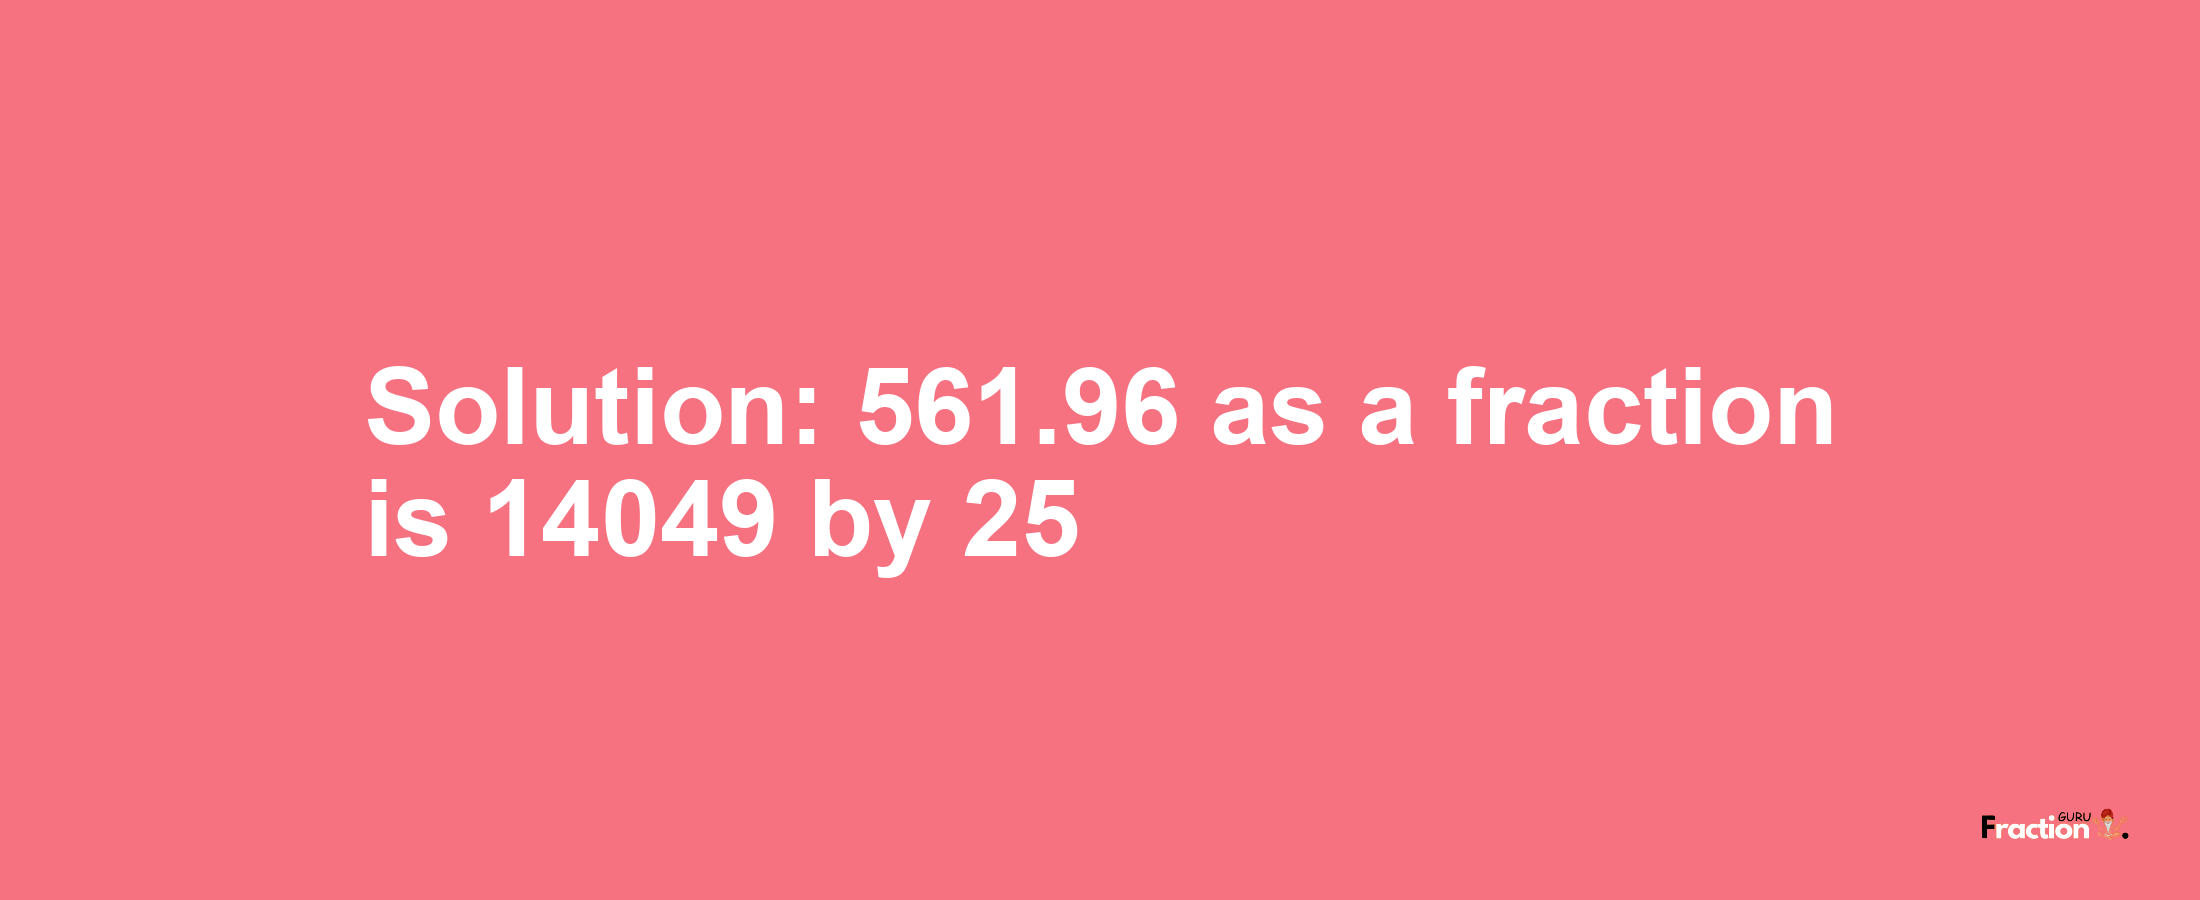 Solution:561.96 as a fraction is 14049/25